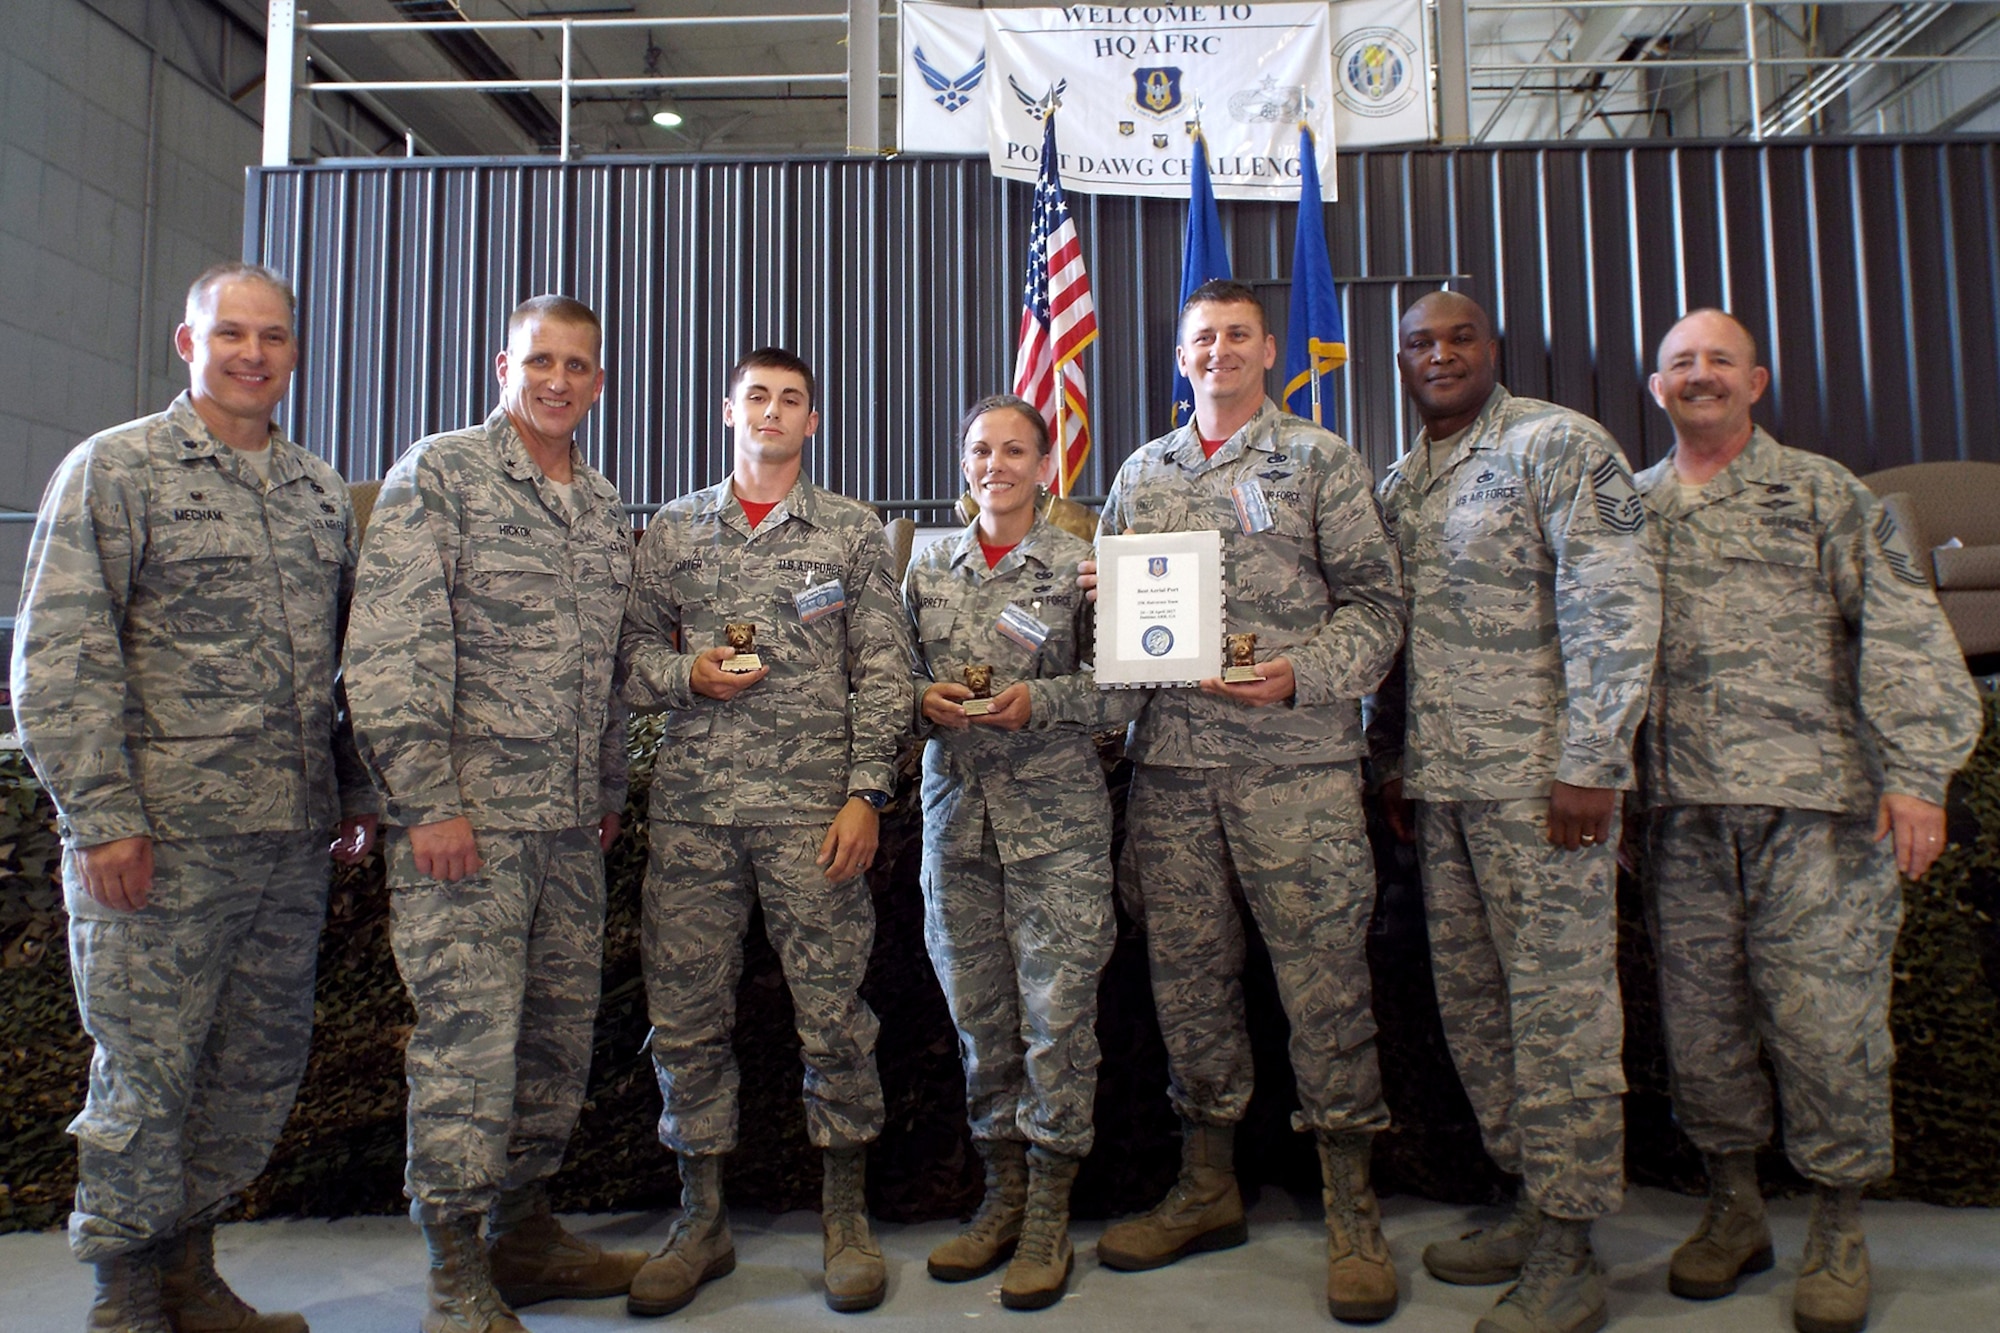 (Left to Right) U.S. Air Force Reserve Lt. Col. Keith Mecham, commander, 67th Aerial Port Squadron, Brig. Gen. John A. Hickok, deputy director of logistics, engineering and force protection, Headquarters Air Force Reserve Command, Senior Airman Jacob Carter, 96th Aerial Port Squadron, Tech Sgt. Kristen Garrett, 96th APS, Master Sgt. Morgan Abner, 96th APS, Chief Master Sgt. Darius Drummond, air transportation career field manager, Headquarters Air Force, and Chief Master Sgt. Richard Hiney, Port Dawg Challenge Chief, and superintendent, 27th Aerial Port Squadron, pose for a photo after receiving the award for “Best 25K Halvorsen Team” during the 2017 Air Force Reserve Command Port Dawg Challenge awards ceremony April 27, 2017, at Dobbins Air Reserve Base, Ga. Twenty-three aerial port teams competed in 12 events over three days to be recognized as the best in the air transportation field. (U.S. Air Force photo by Tech. Sgt. Debra Gentry/Released)